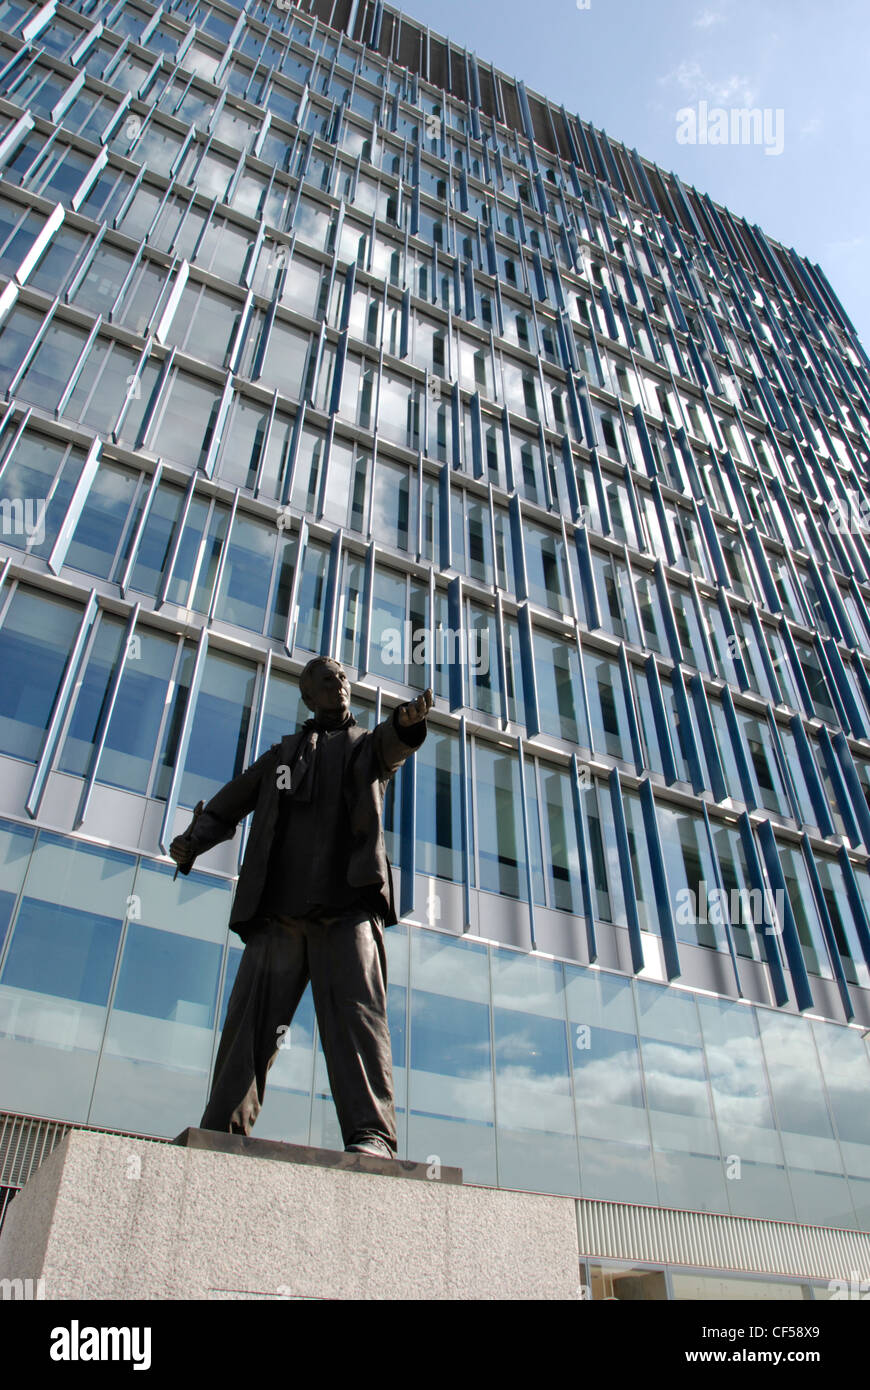 Statue of a man outside the Blue Fin Building in Sumner Street. The statue is called Monument to the Unknown Artist and was crea Stock Photo